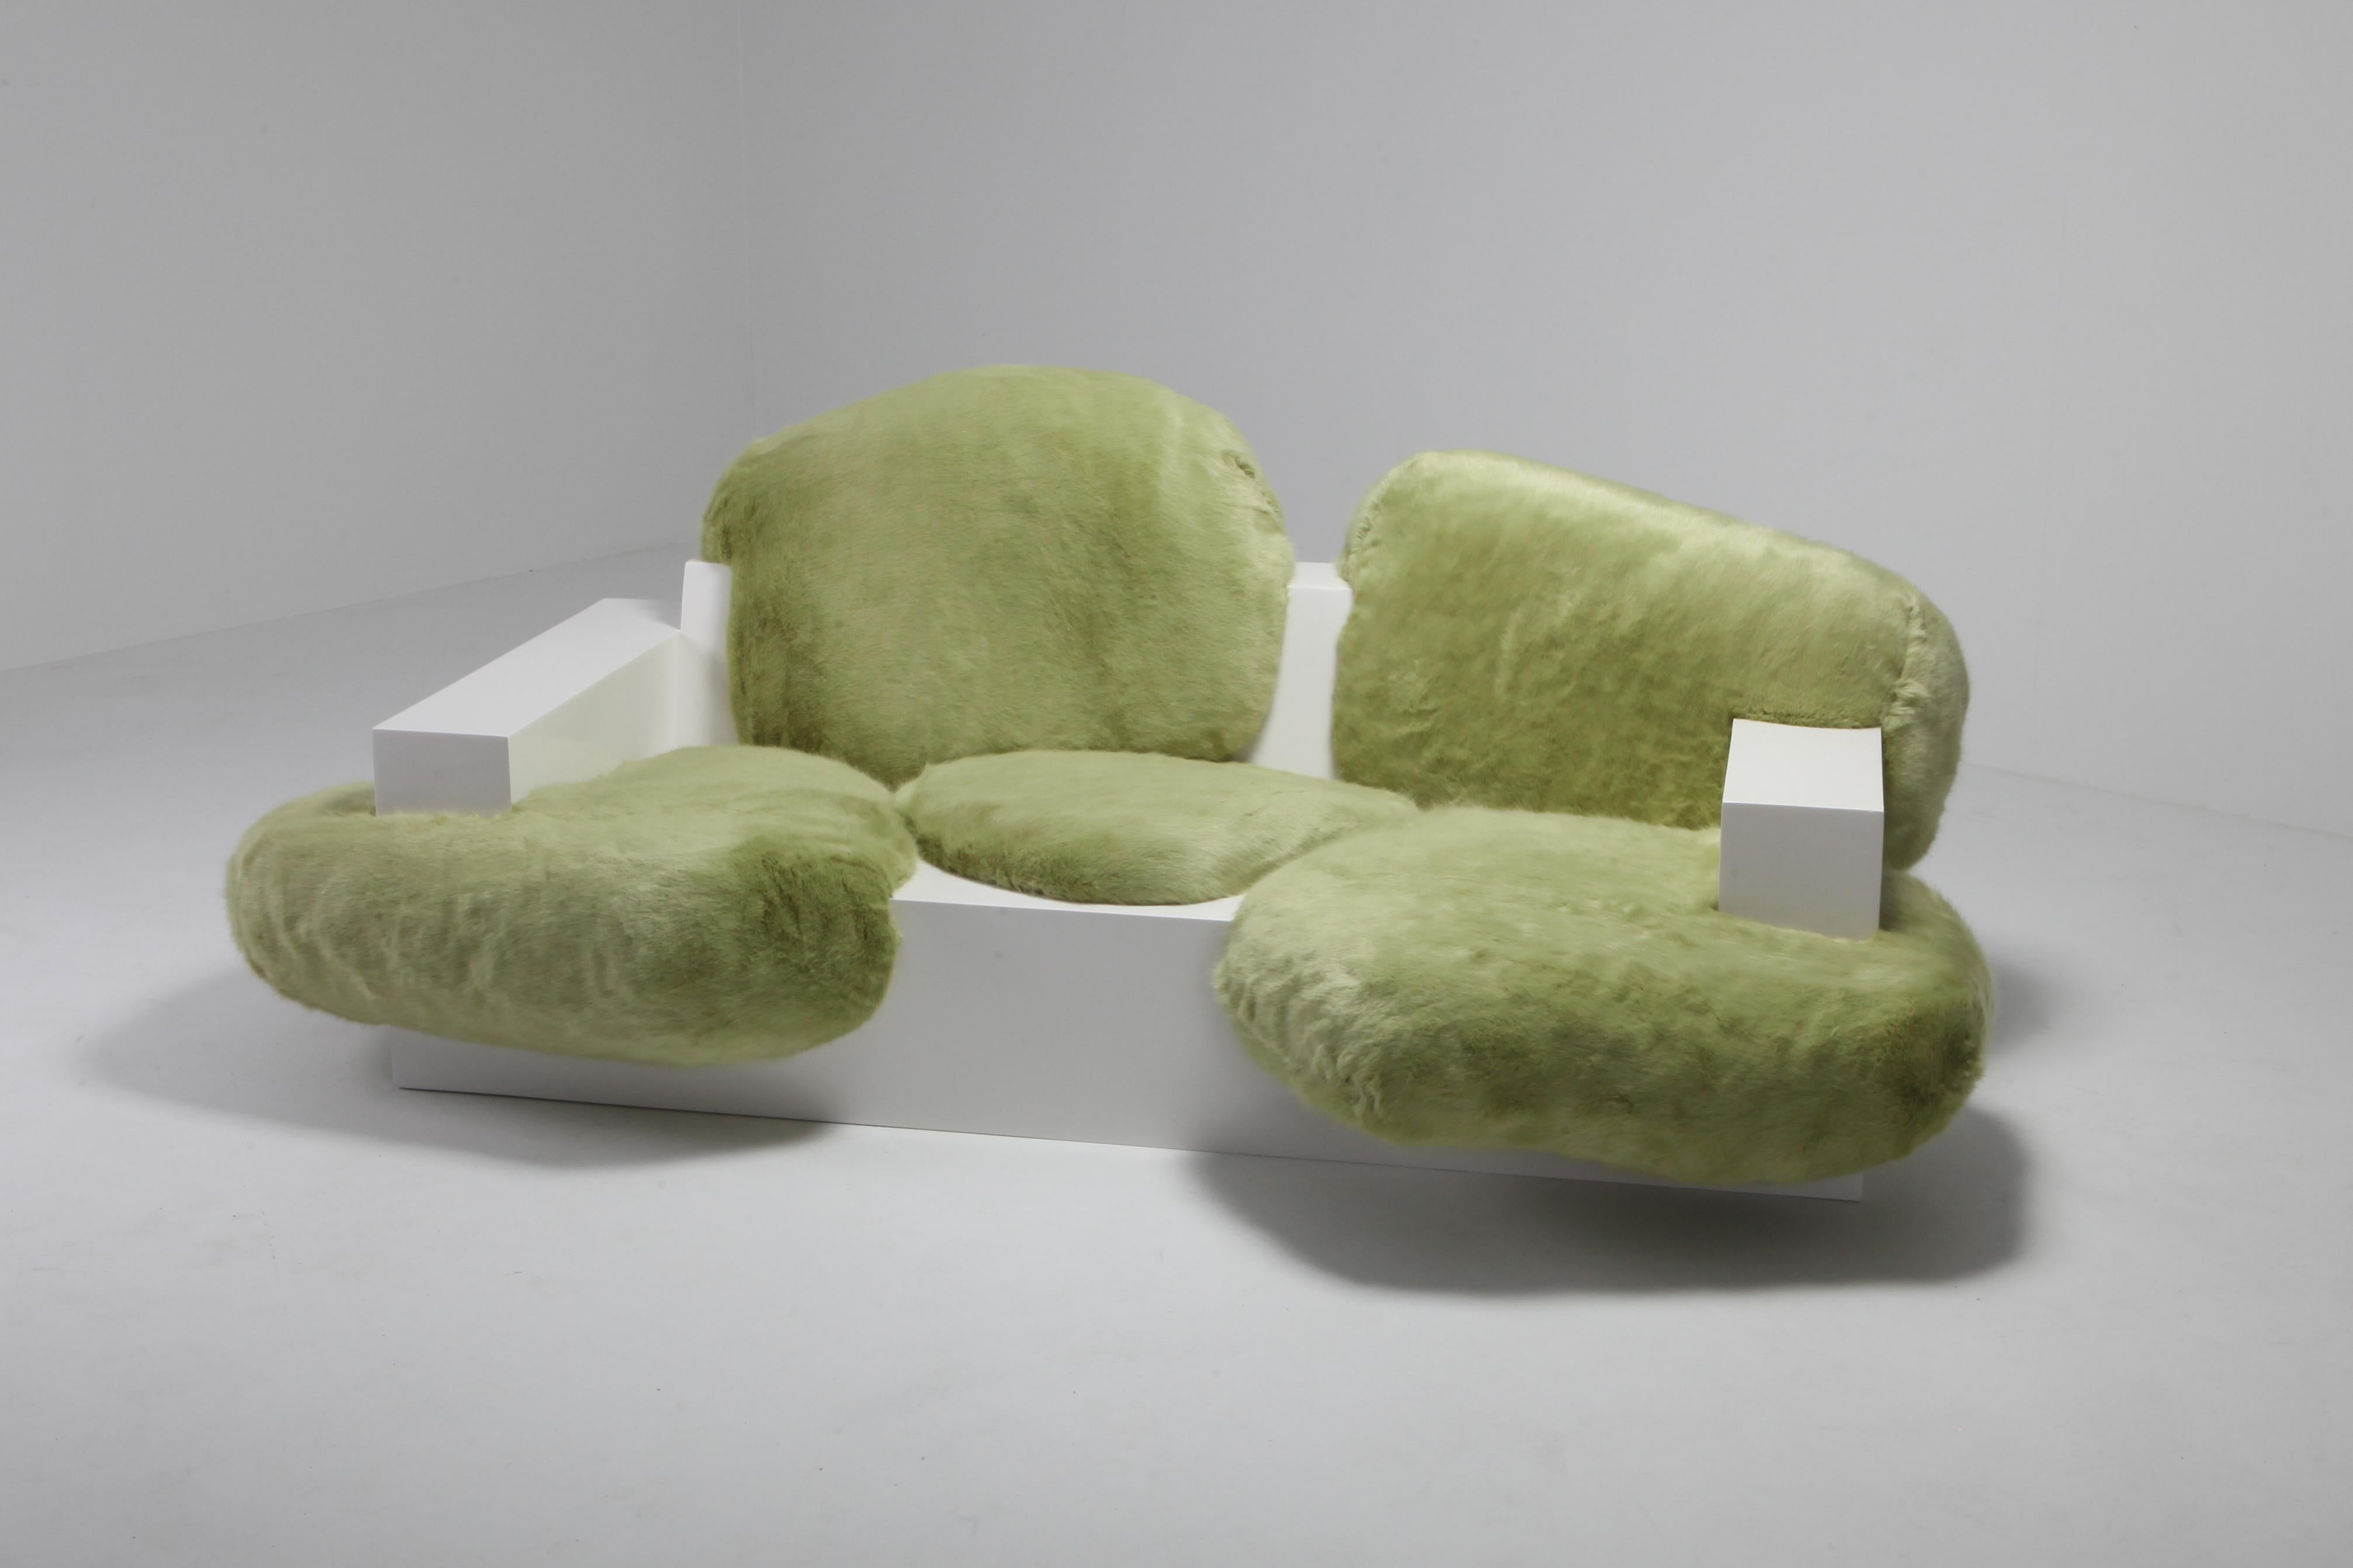 Pillow couch (prototype) in white lacquer and green faux fur
Sizes: width 242 cm, depth 135 cm, height 87 cm material: wood, PU-foam, faux fur, car paint edition: prototype
developed at alfa.brussels.

Schimmel & Schweikle is an ongoing